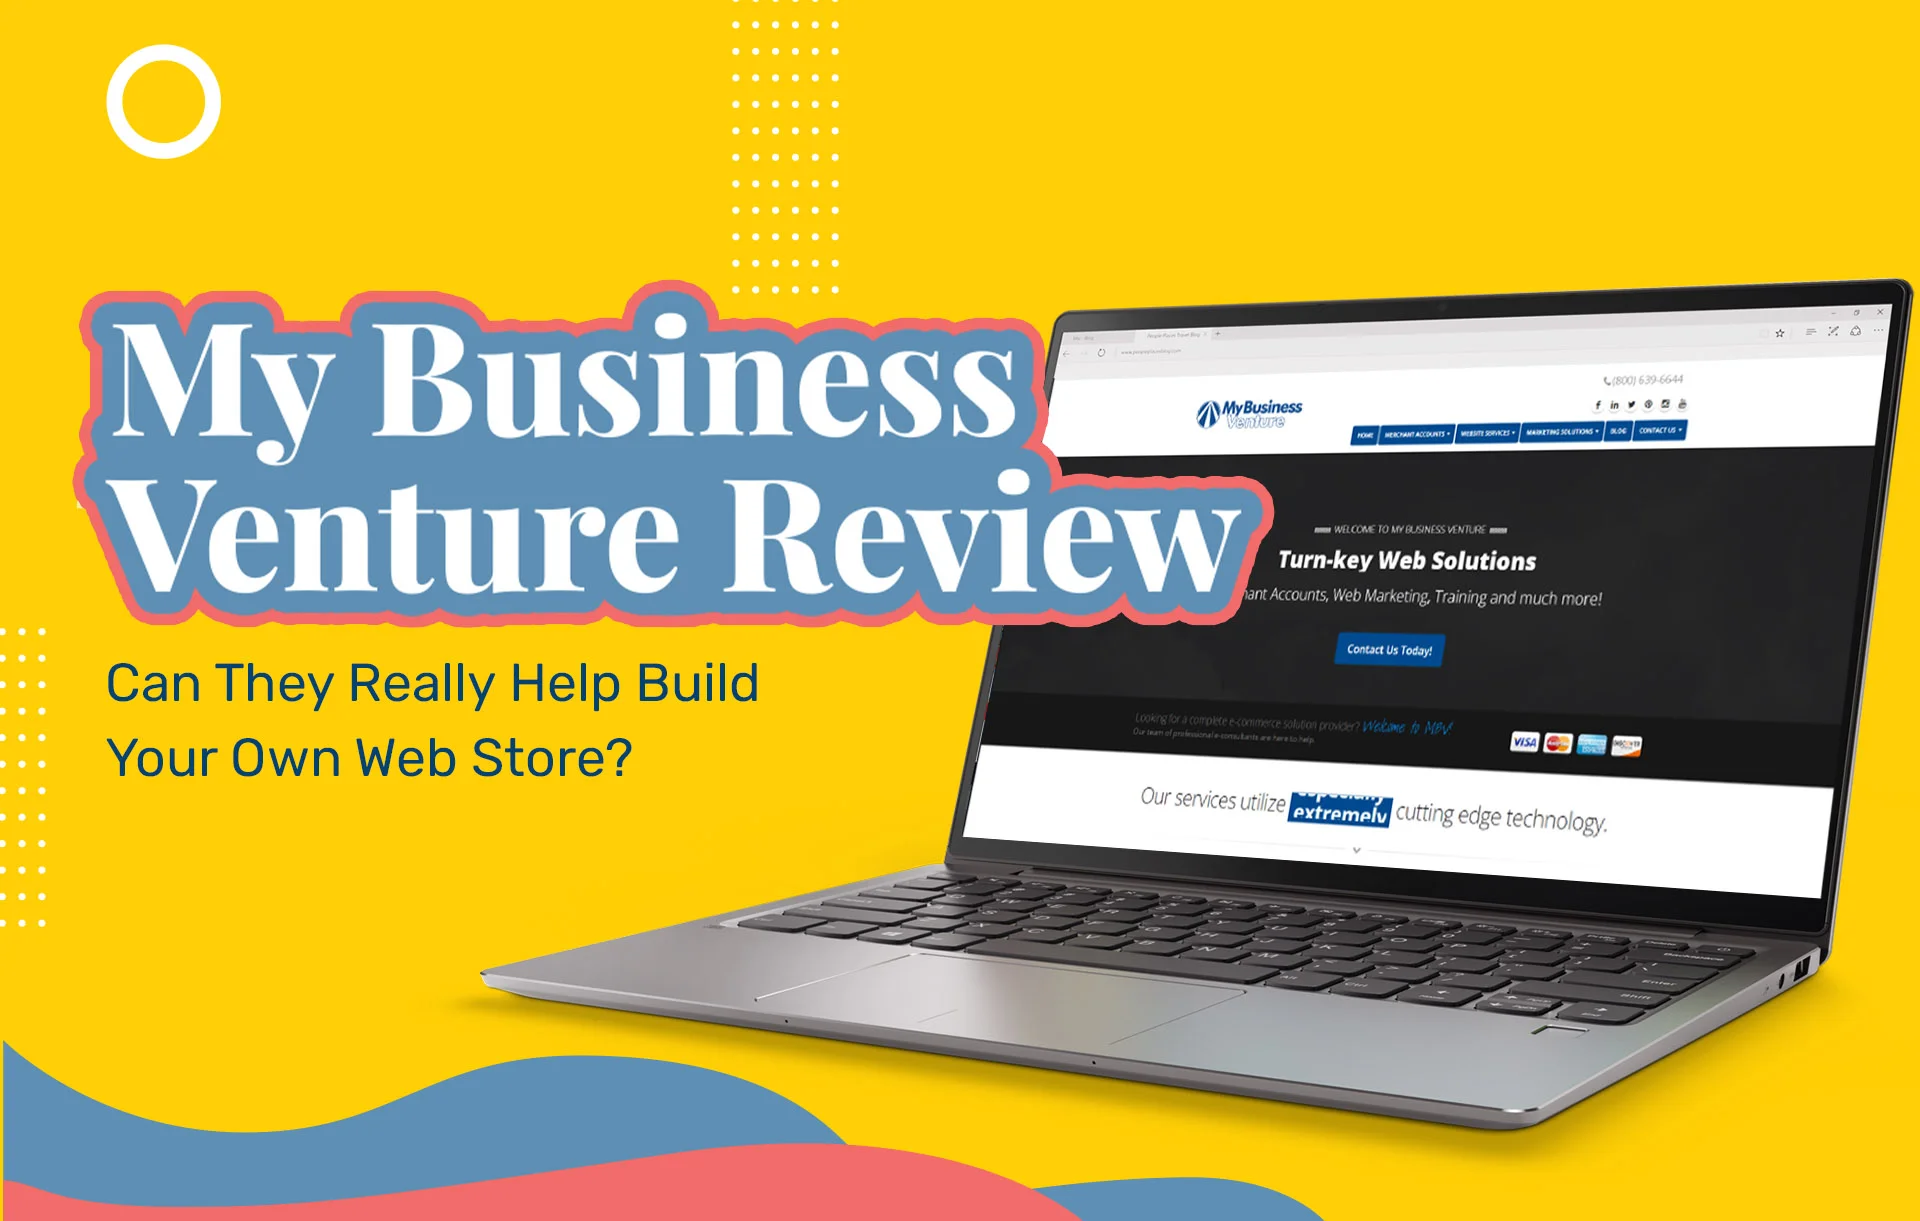 My Business Venture Reviews: Can They Really Help Build Your Own Web Store?